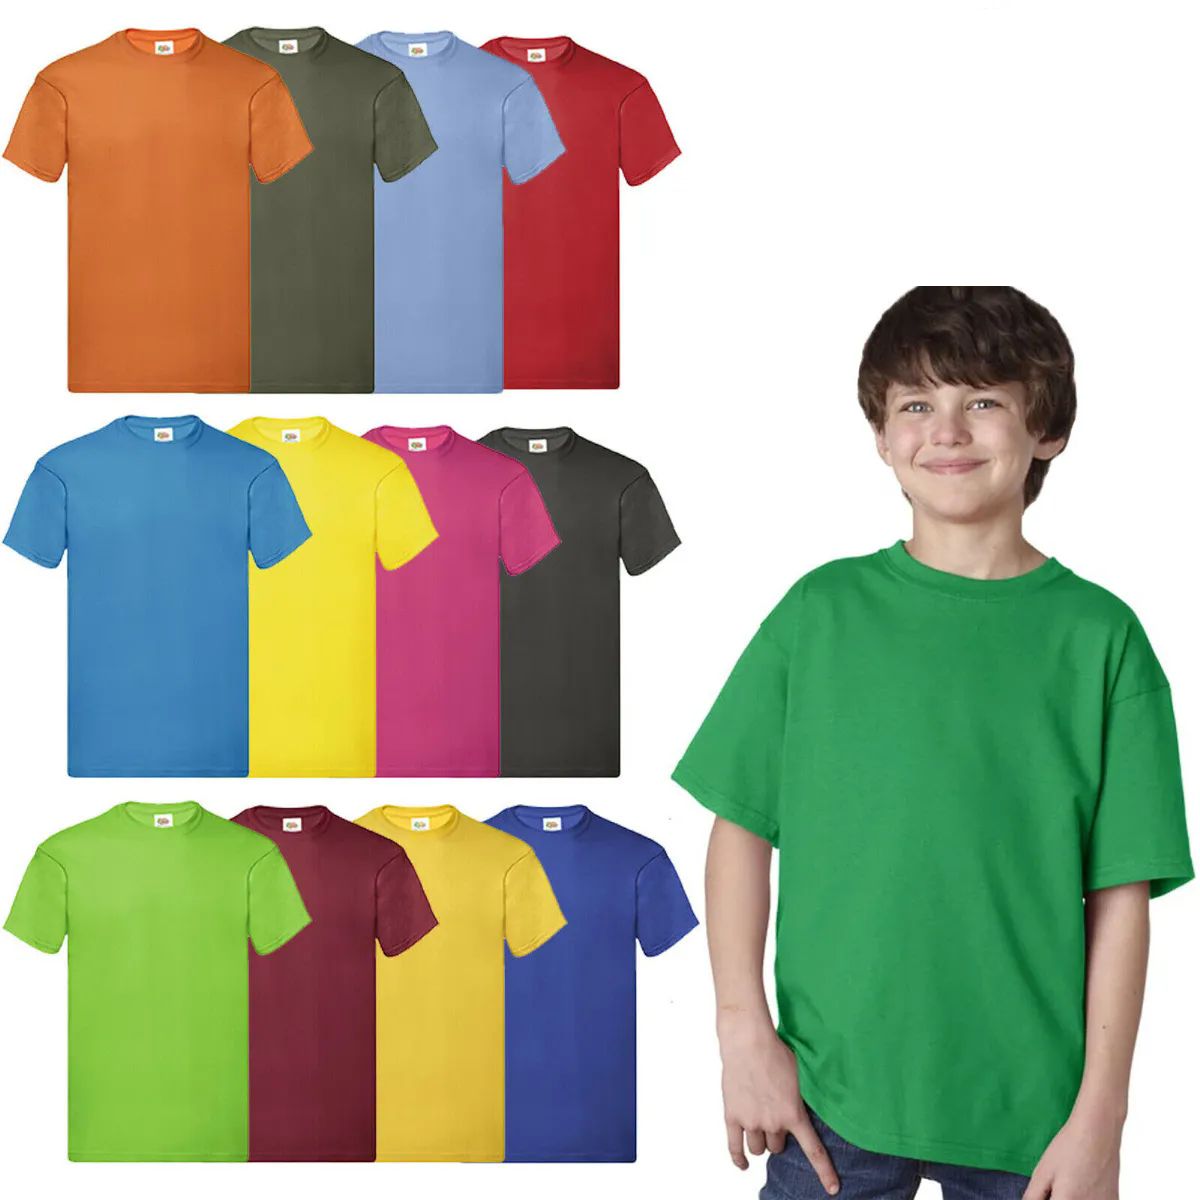 504 Pieces of Billion Hats Kids Youth Cotton Assorted Colors T Shirts Size xs